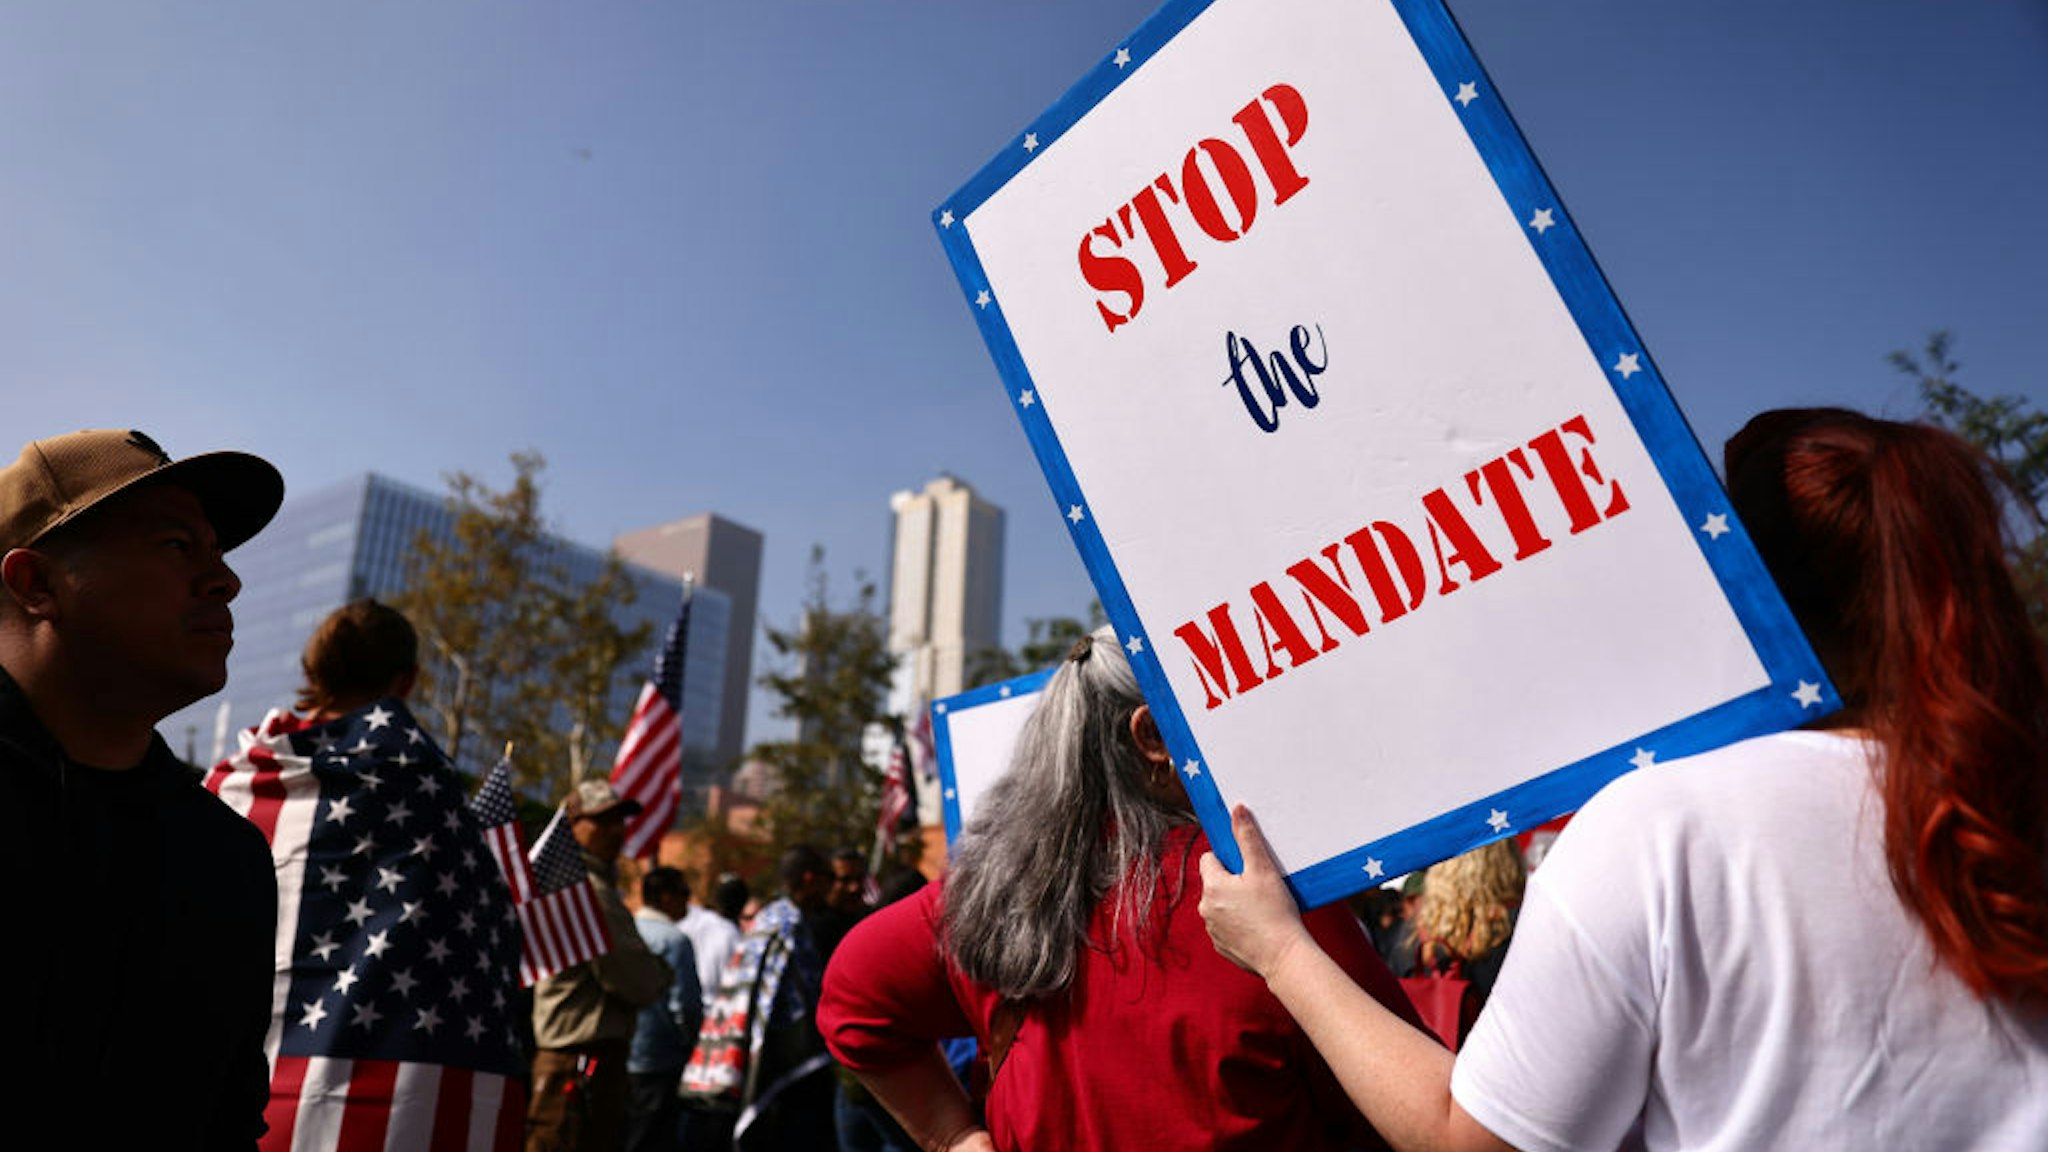 LOS ANGELES, CALIFORNIA - NOVEMBER 08: Protestors gather in Grand Park at a ‘March for Freedom’ rally demonstrating against the L.A. City Council’s COVID-19 vaccine mandate for city employees and contractors on November 8, 2021 in Los Angeles, California. The City Council has set a deadline of December 18 for all city employees and contractors to be vaccinated except for those who have religious or medical exemptions.